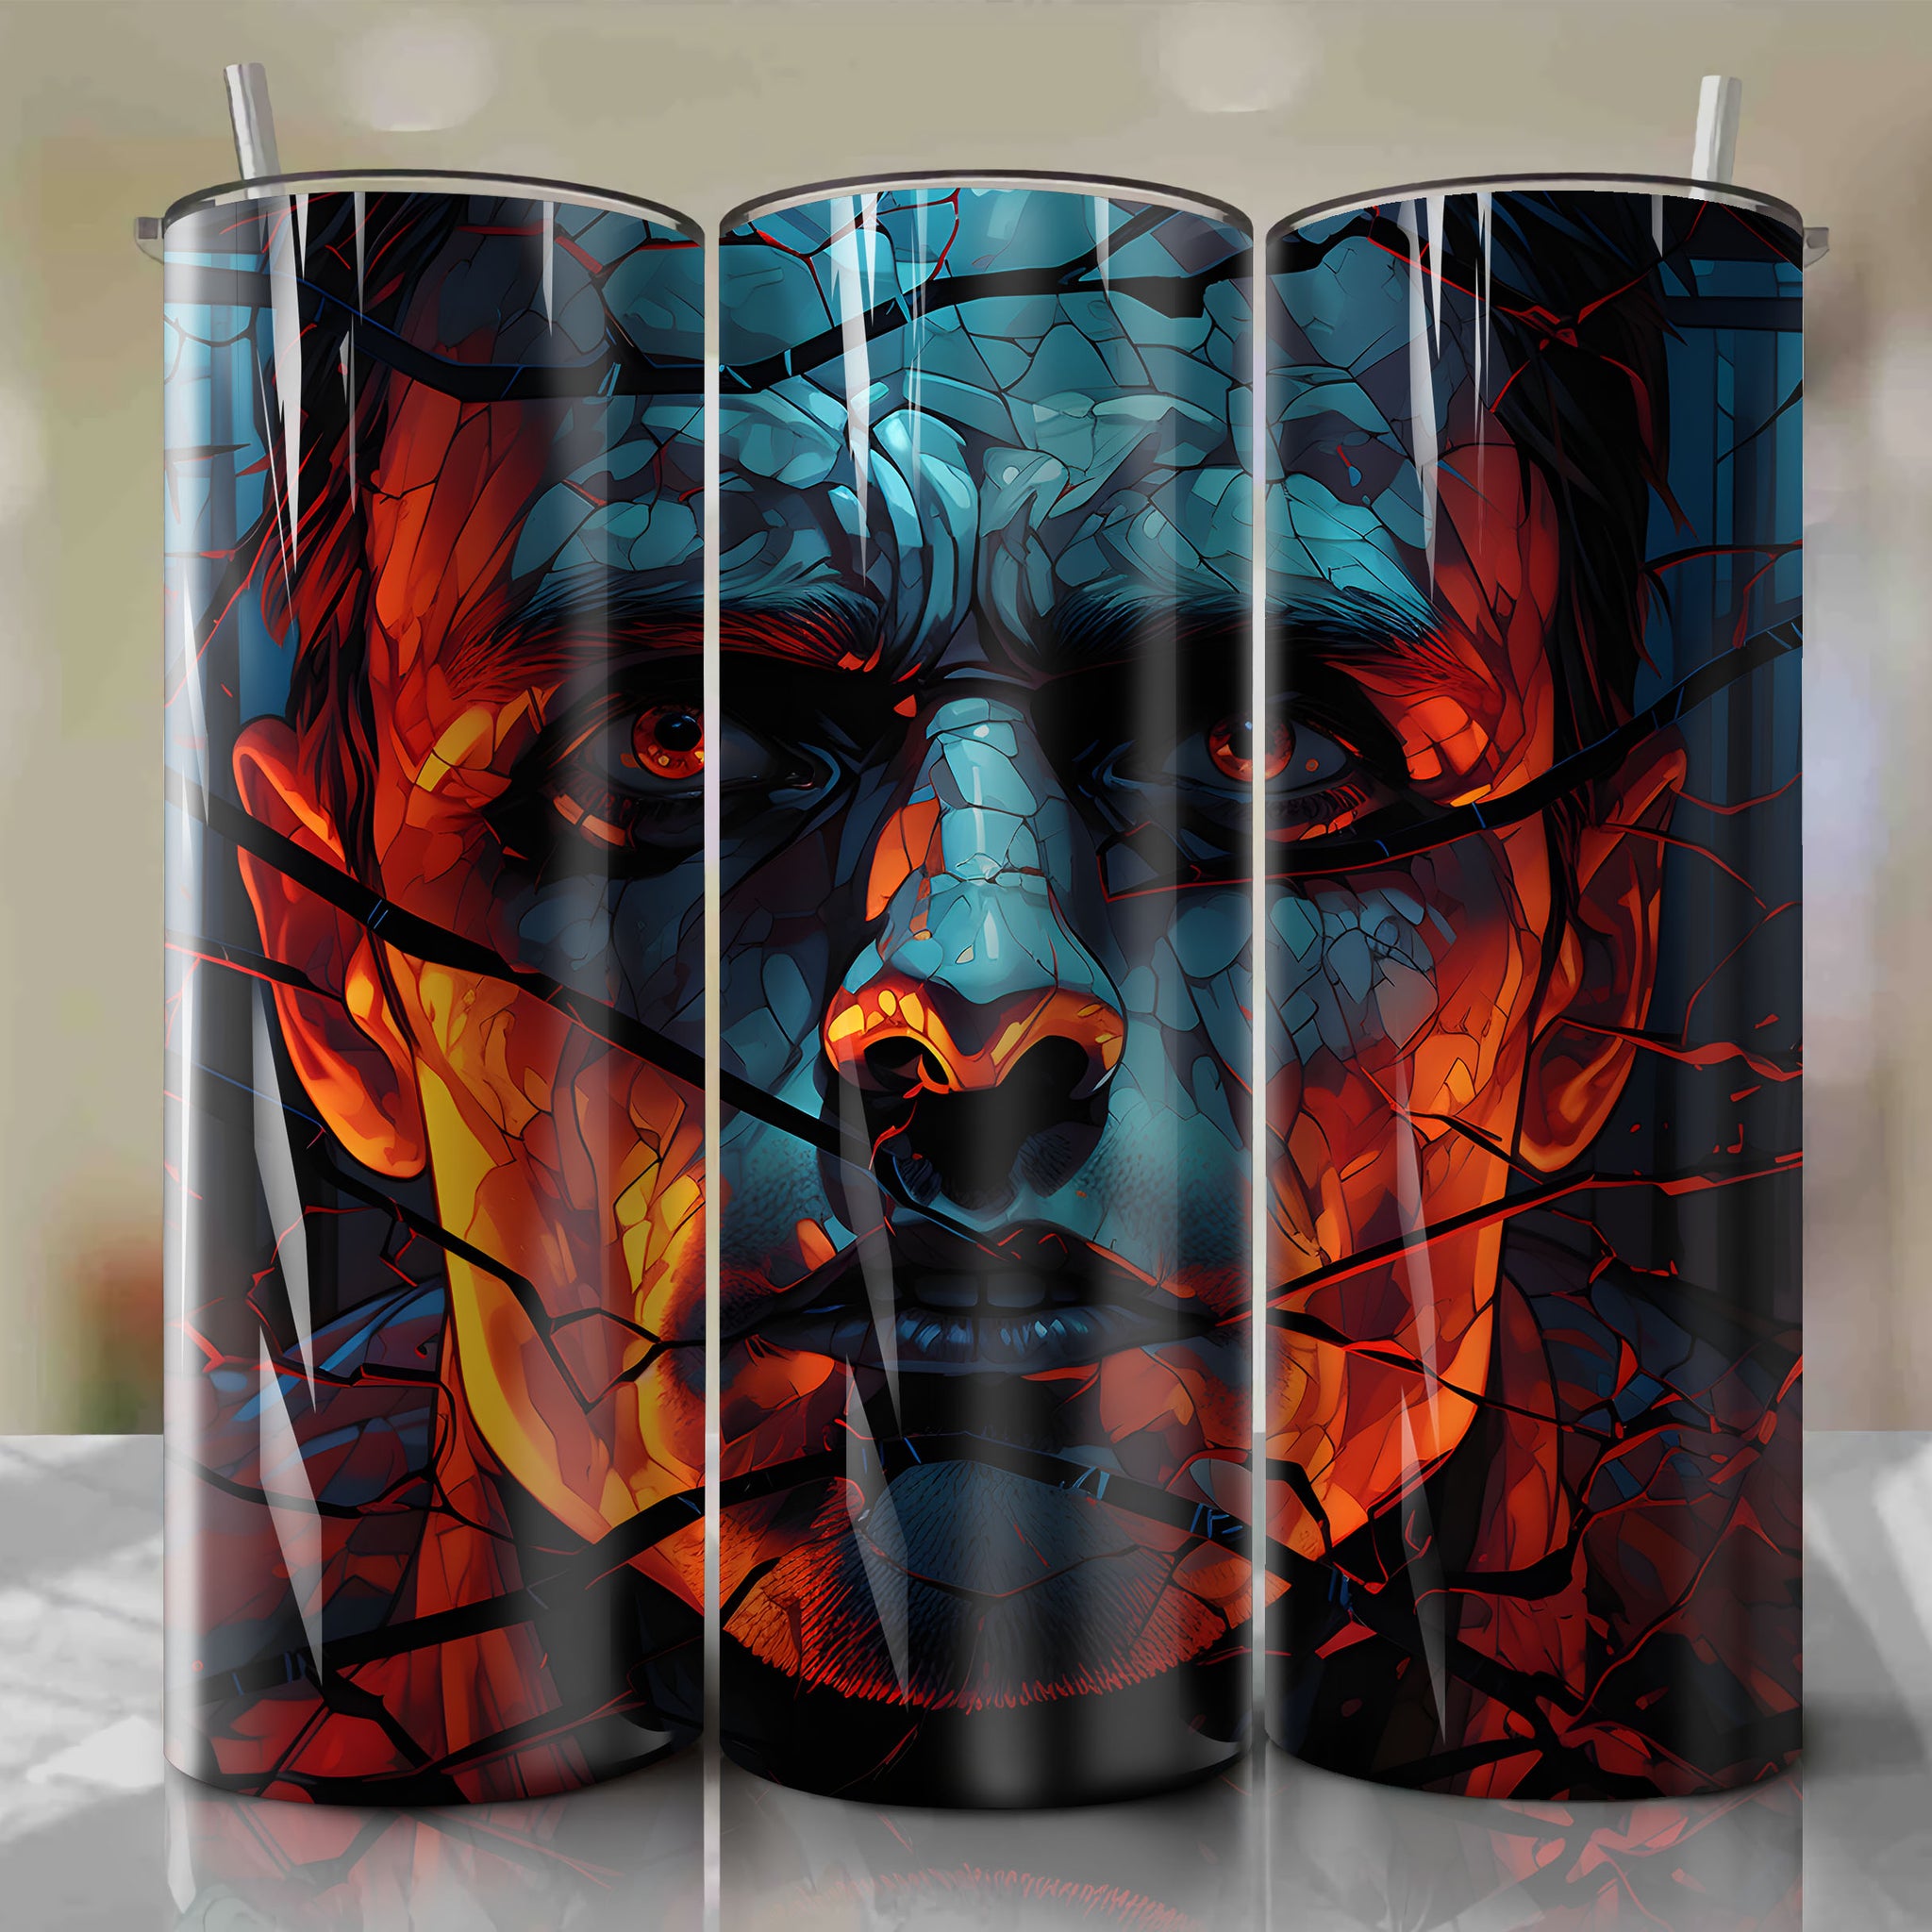 Tumbler Wrap - Hannibal Lecter Cracked Glass Cage 3D Rendering